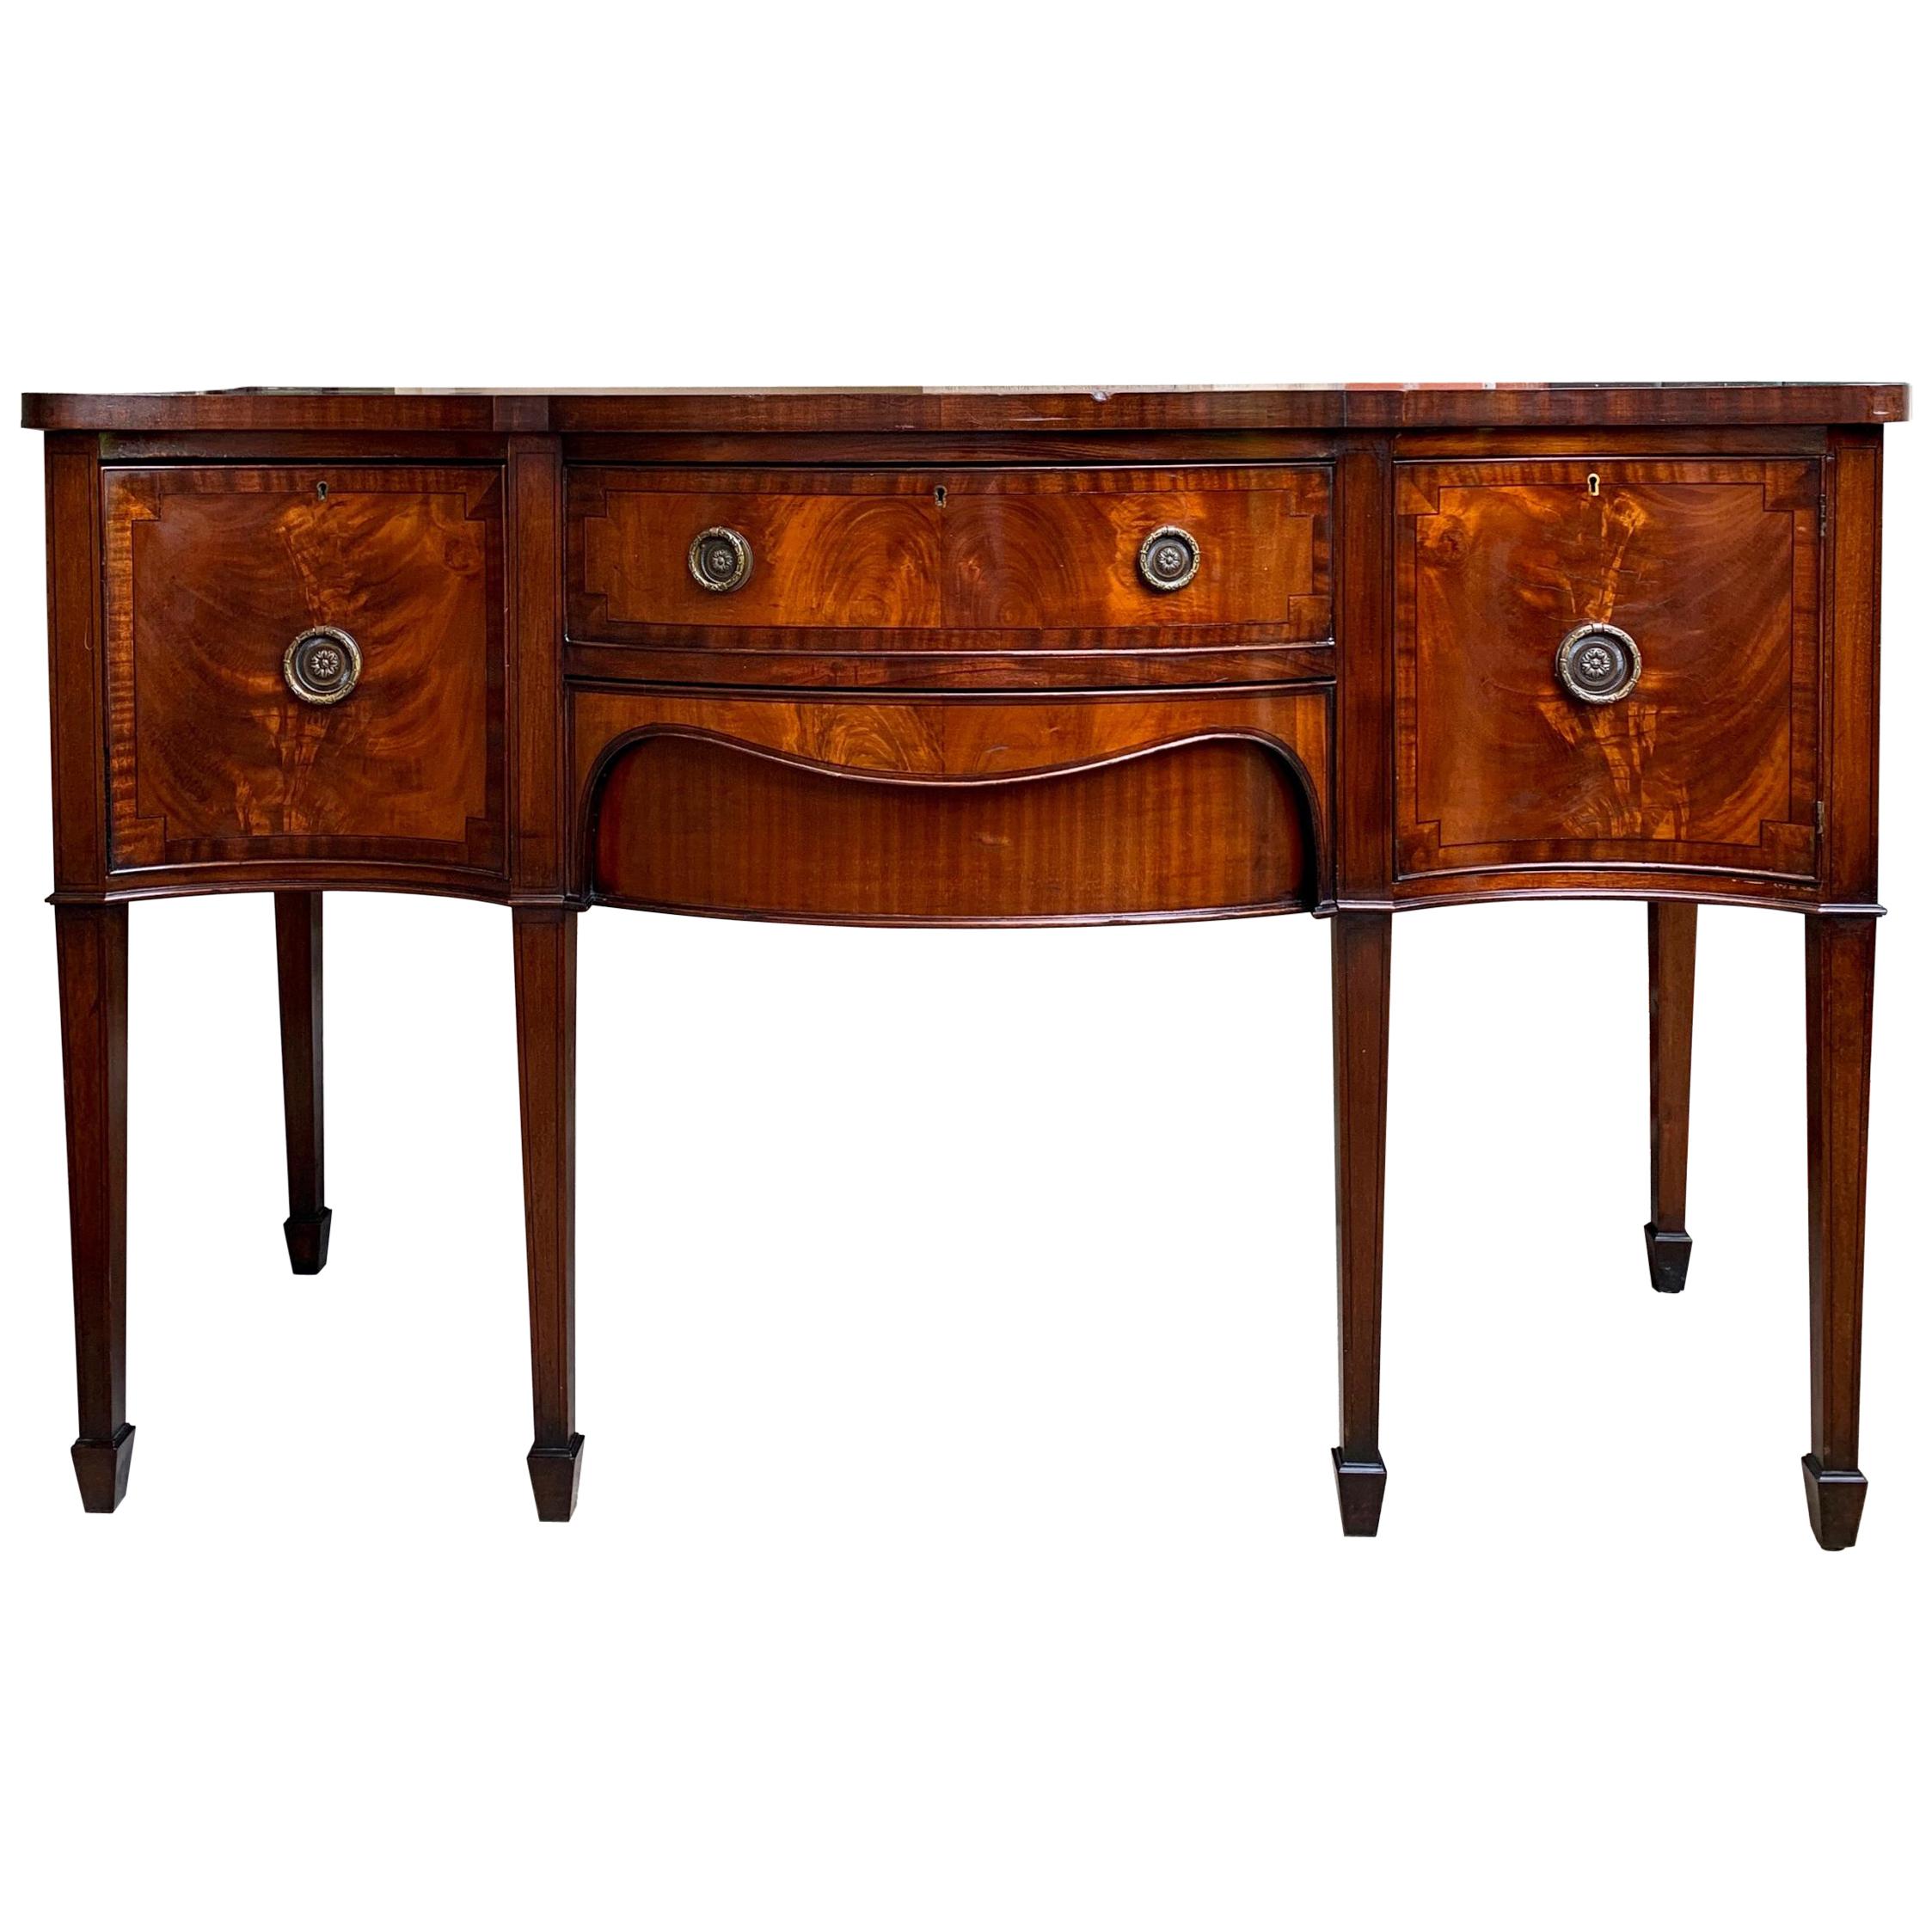 20th Century English Flame Mahogany Buffet Sideboard Regency Neoclassical Style